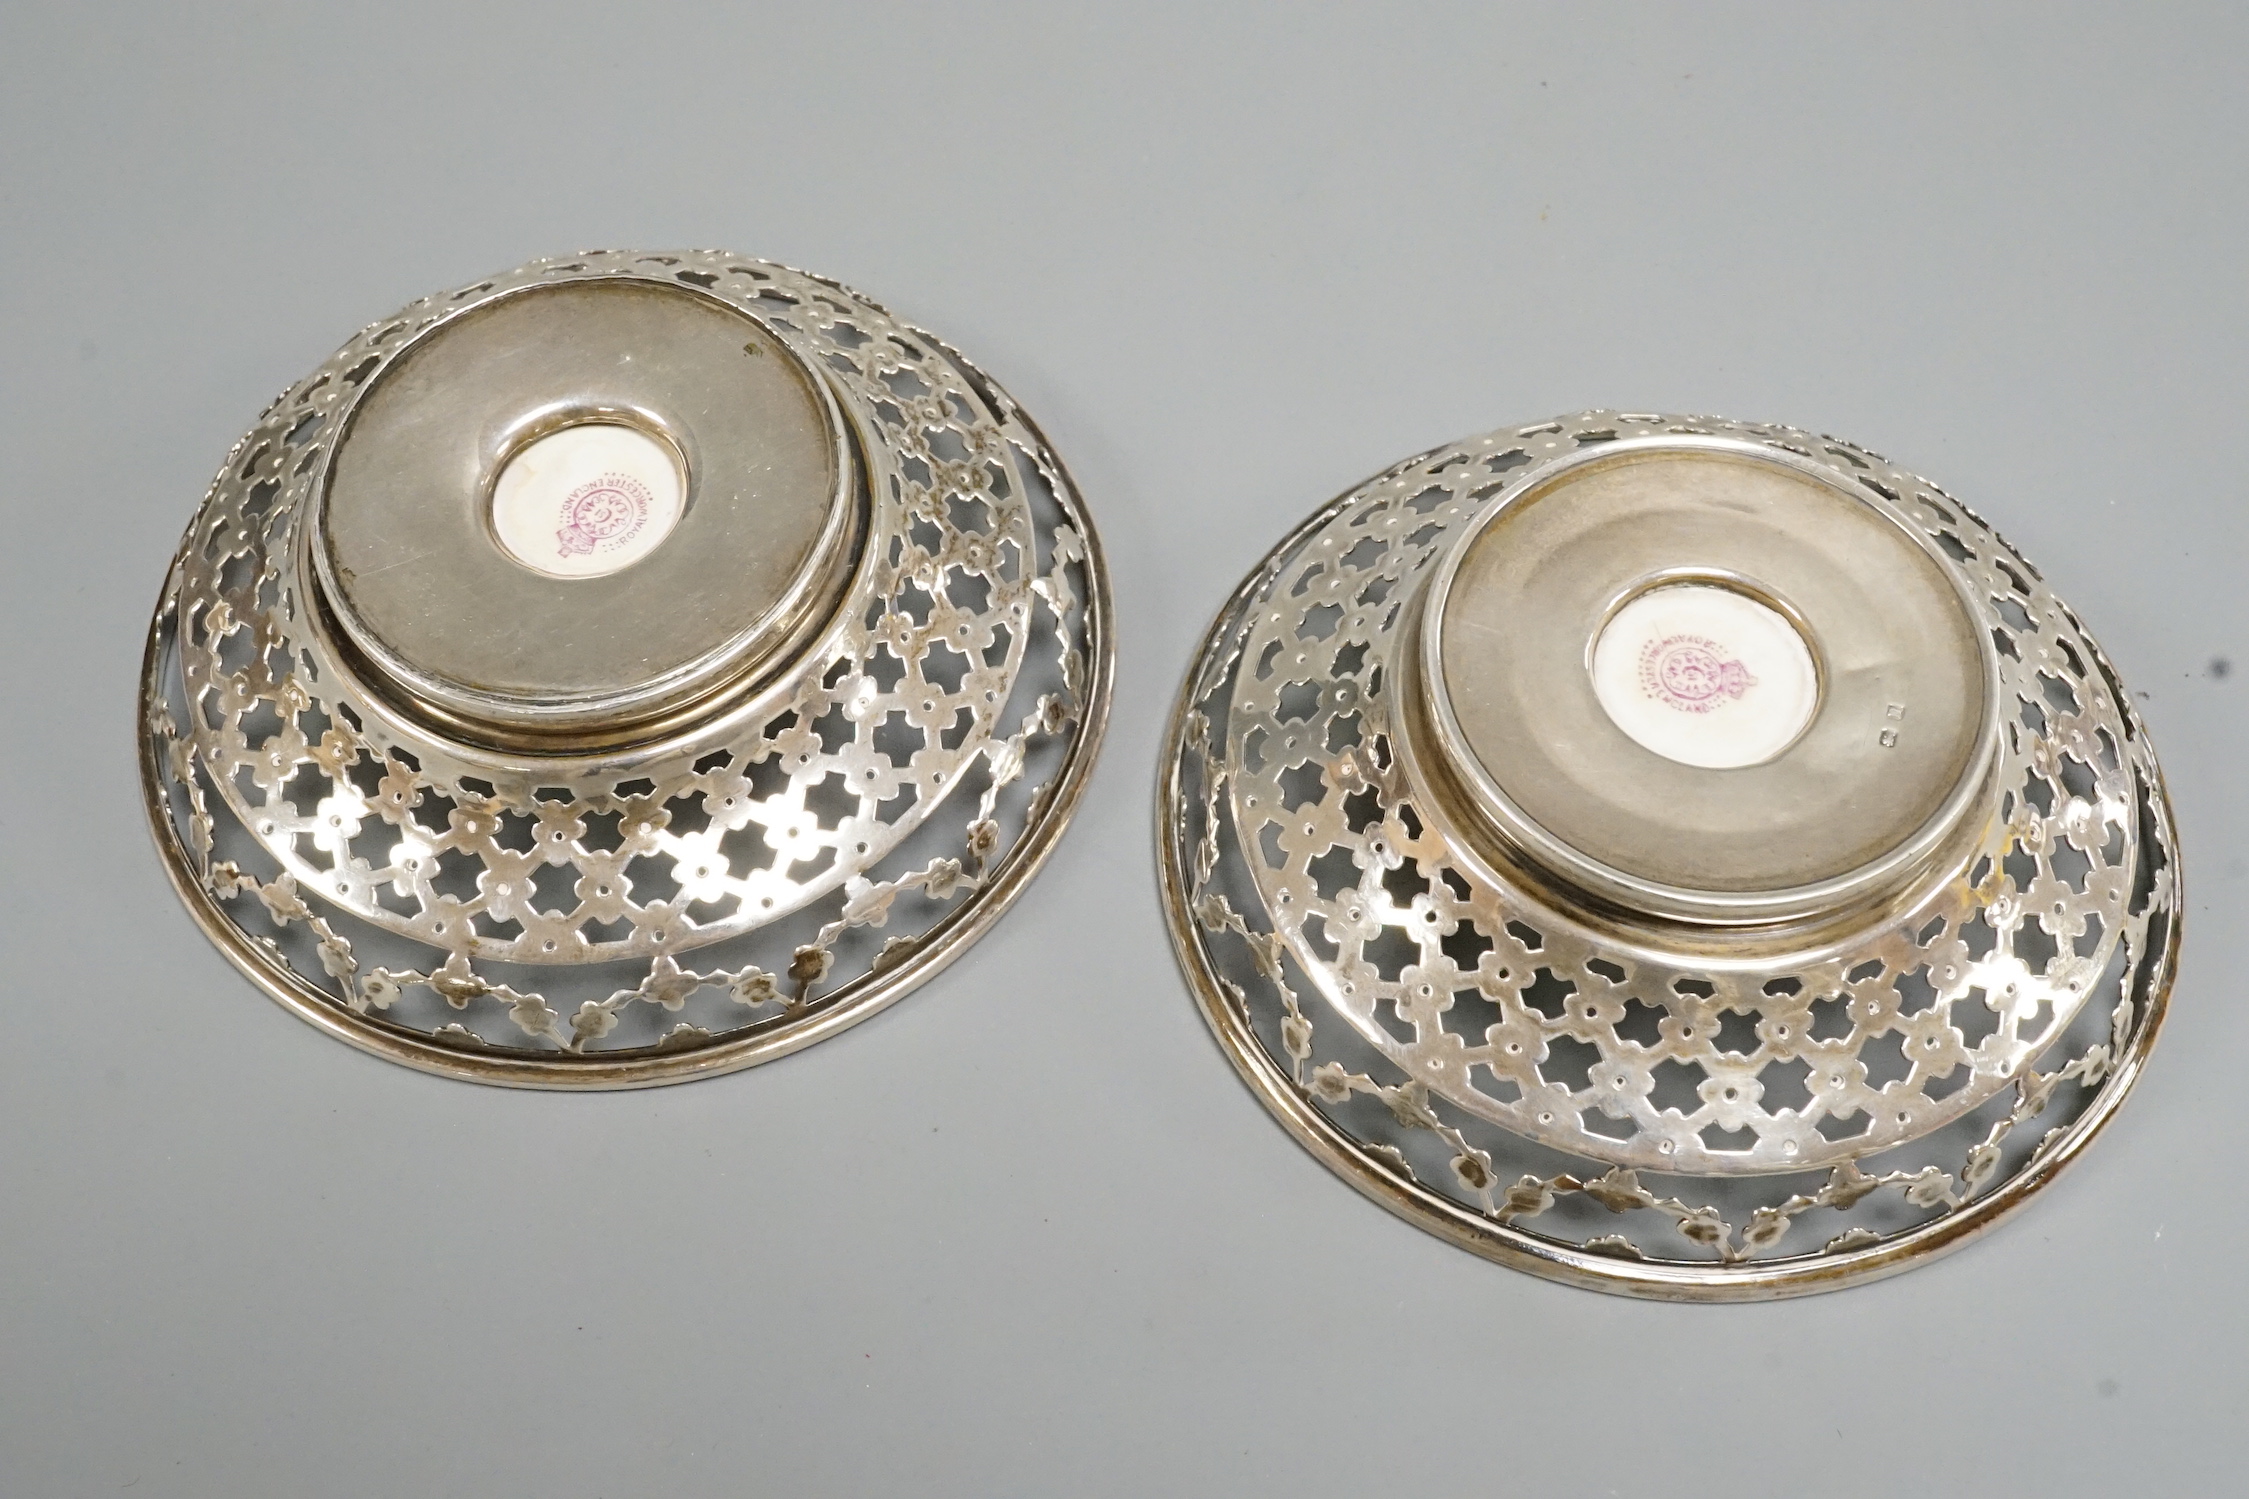 A pair of George V pierced silver mounted Royal Worcester panel bon bon dishes, painted by Raymond Rushton, hallmarked for Sanders & MacKenzie, Birmingham, 1912, diameter 10.5cm.